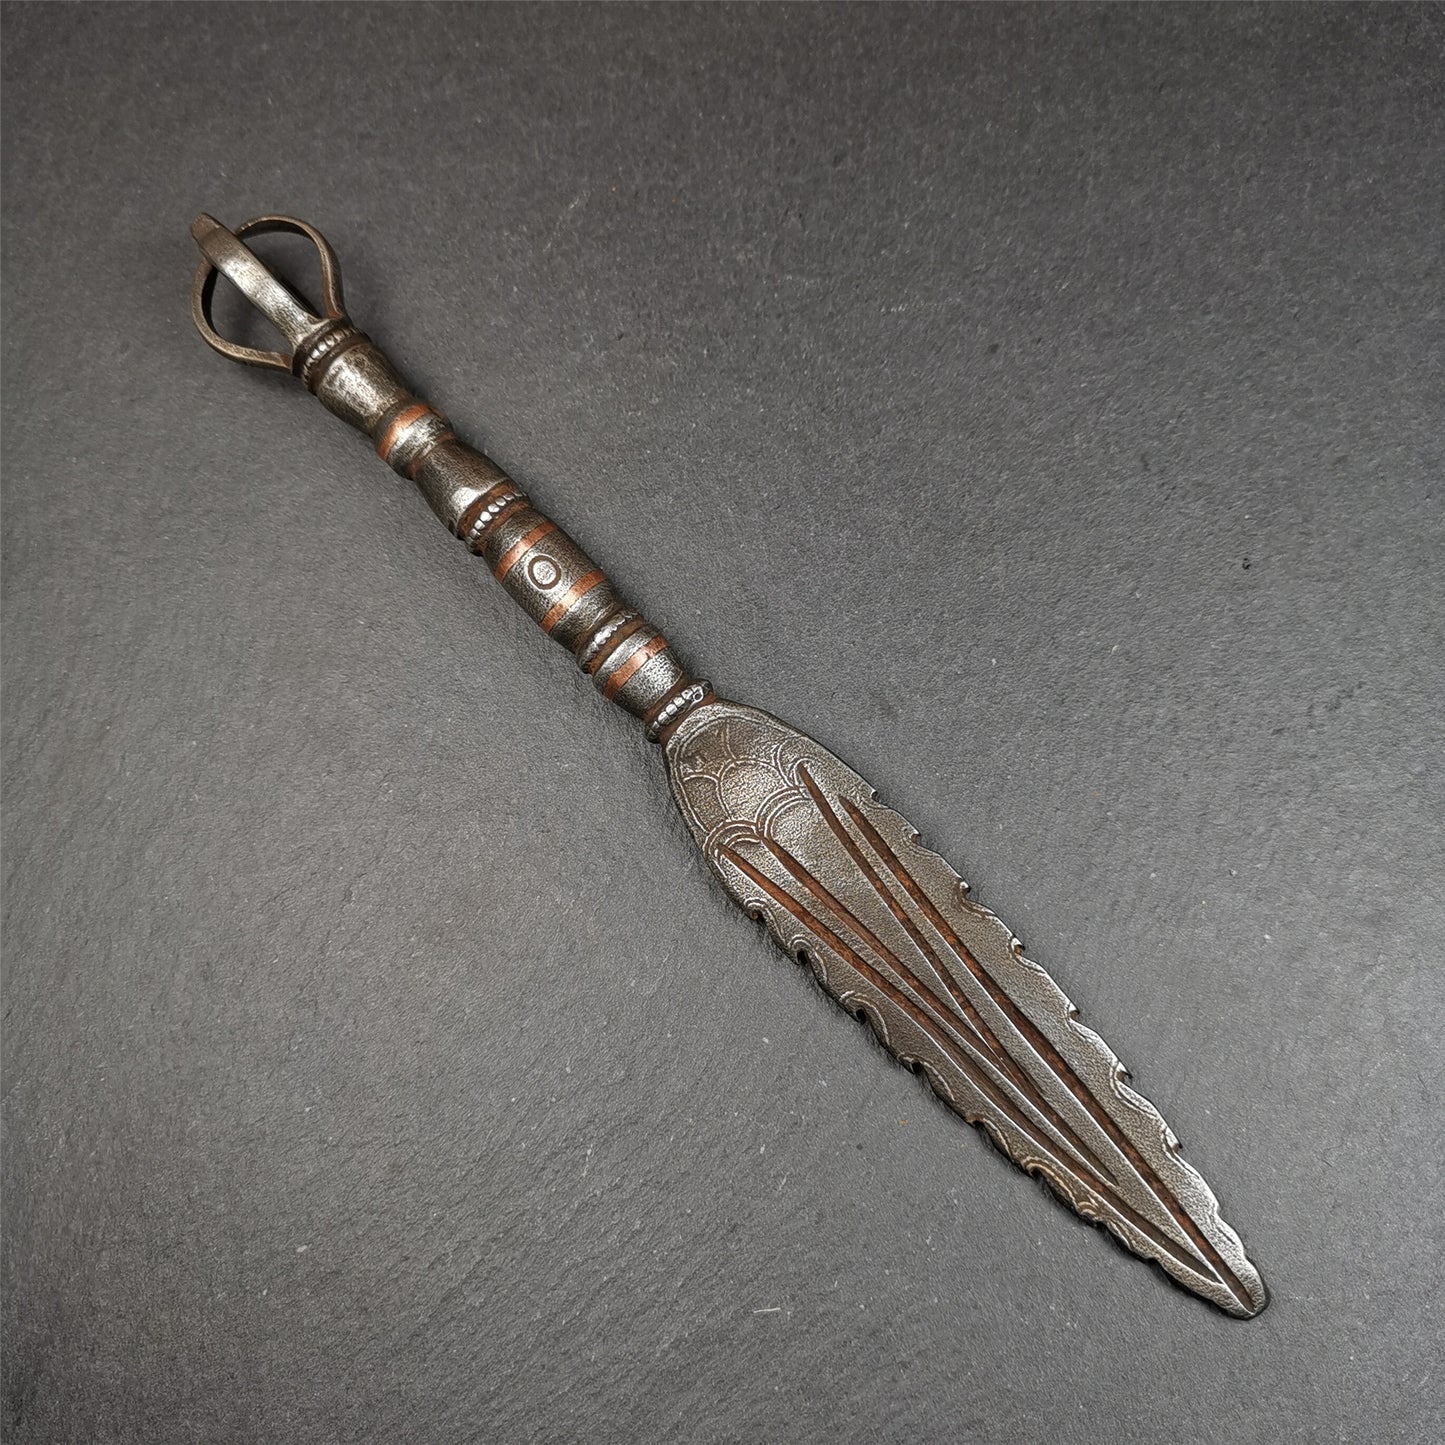 This vajra sword was handmade by Tibetan craftsmen from Tibet in 1990s. It's Fire Vajra Sword of Wisdom Buddha Manjushri,made of cold iron,inlaid red copper stripe,carved with flame pattern, and the half vajra at the tail,8.3 inches length.